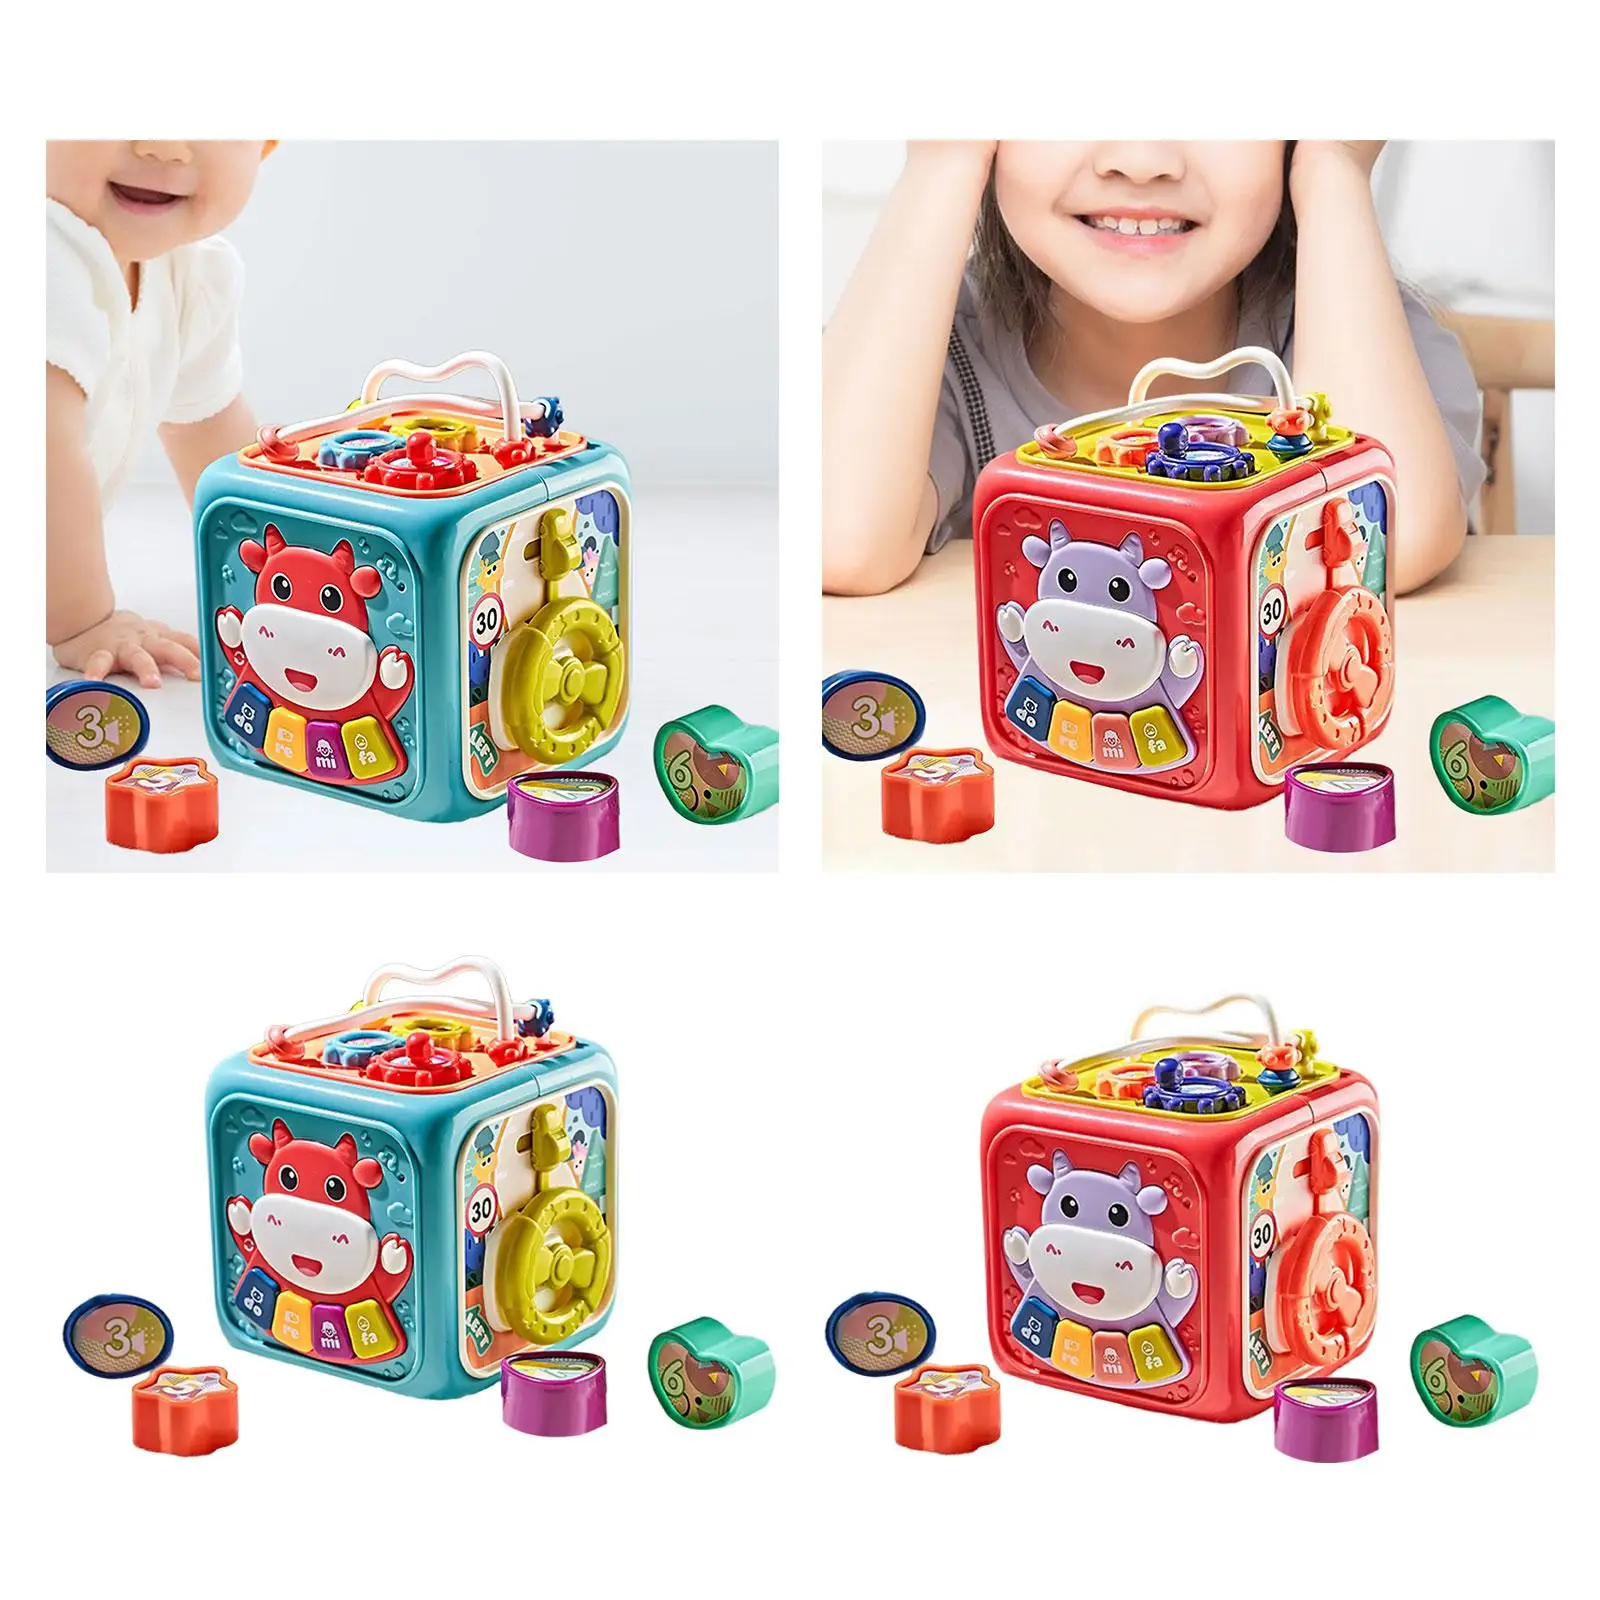 Baby Musical Baby Activity Cube Center Toy for 6 Month Old Baby Toys